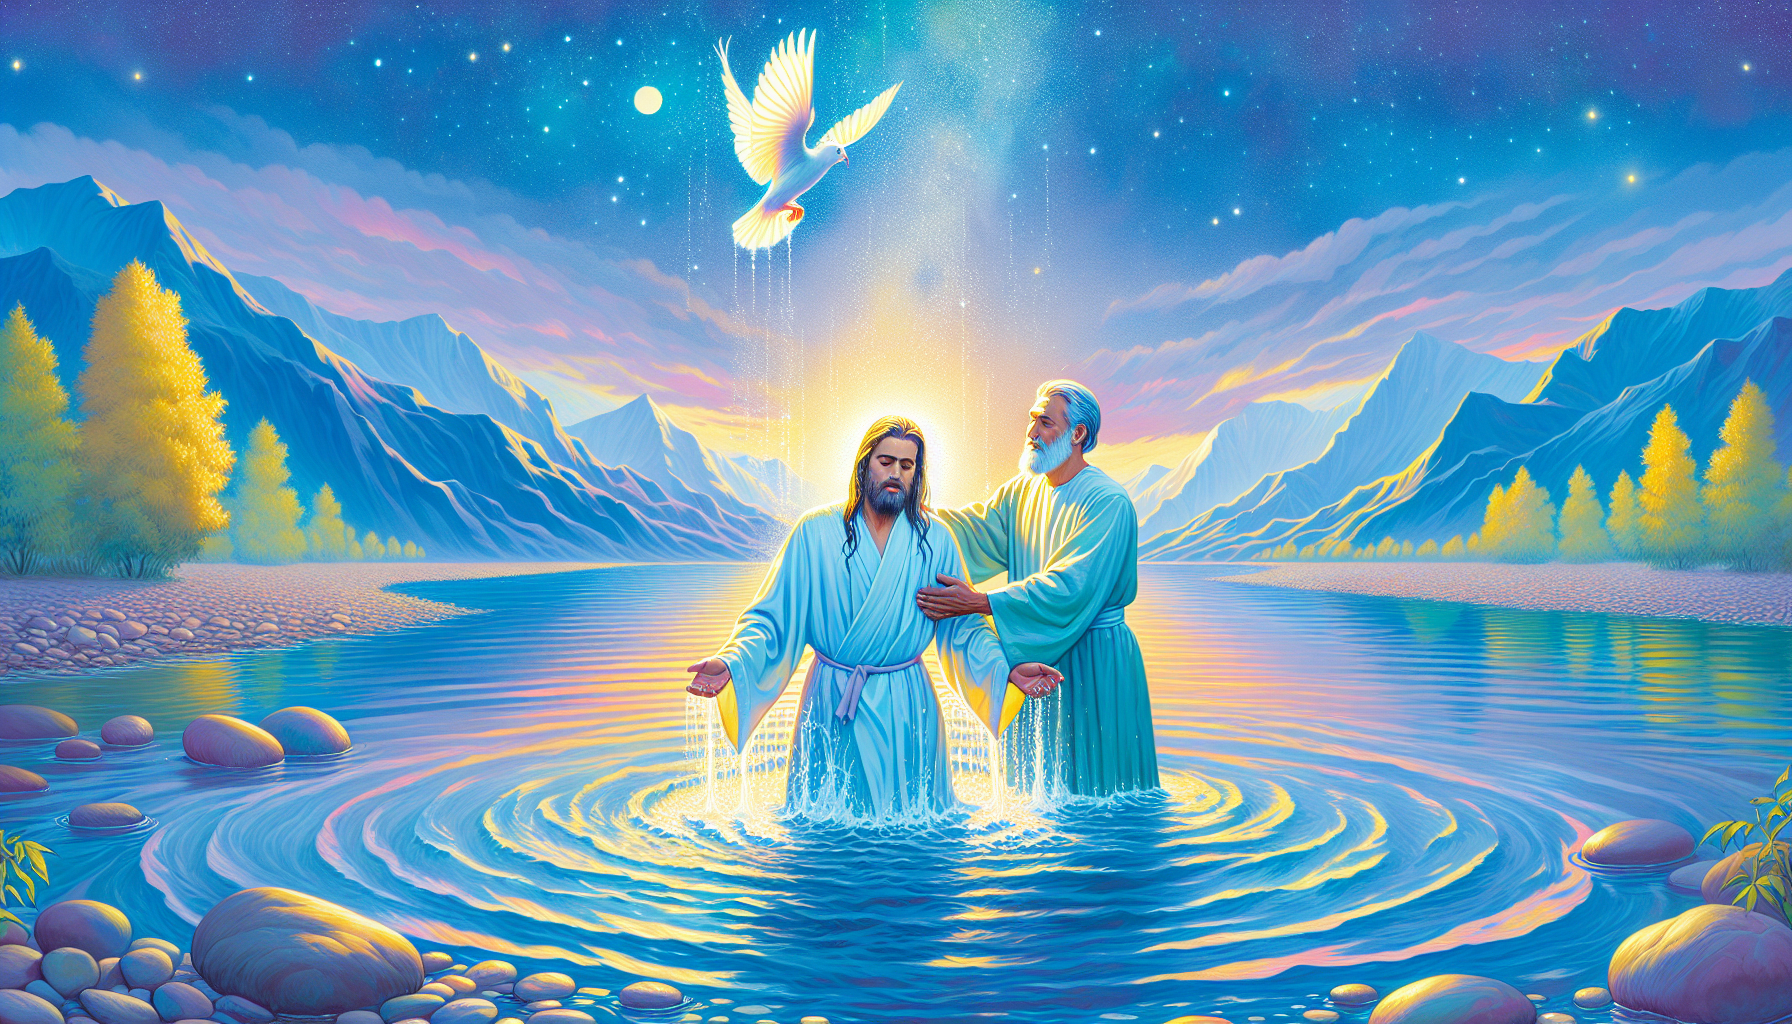 Create an image that depicts the baptism of Jesus by John the Baptist in the Jordan River, showcasing the moment when a dove descends from the heavens and the heavens open up, illustrating the spiritu